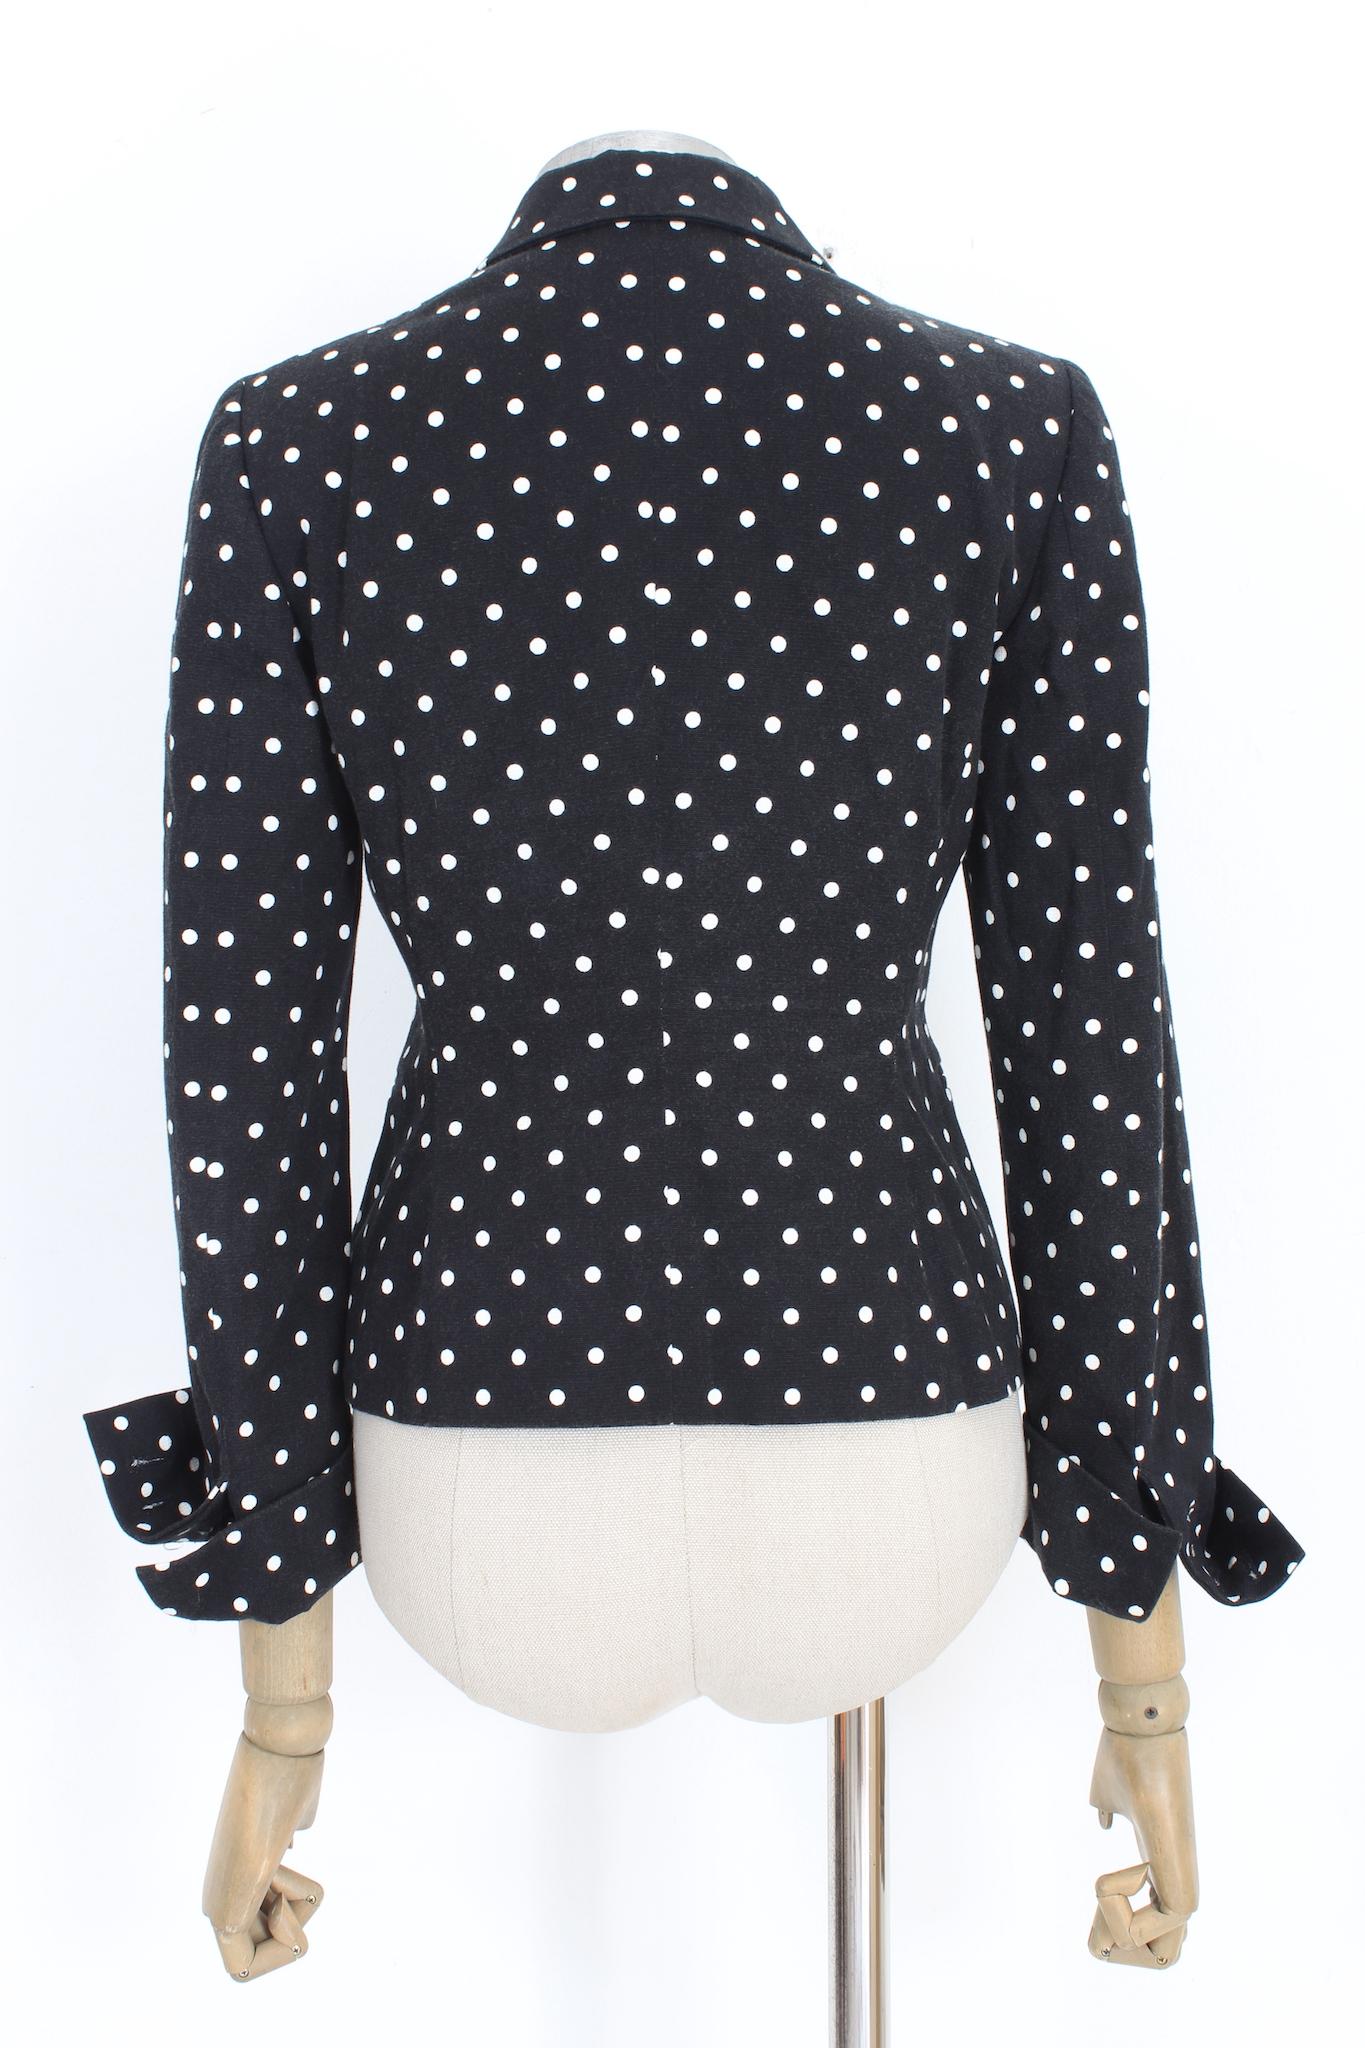 Moschino 2000s flared casual jacket. Black and white polka dot pattern, 97% cotton fabric, 3% other fibers. Made in Italy.

Size: 42 It 8 Us 10 Uk

Shoulder: 42 cm
Bust/Chest: 44 cm
Sleeve: 59 cm
Length: 63 cm